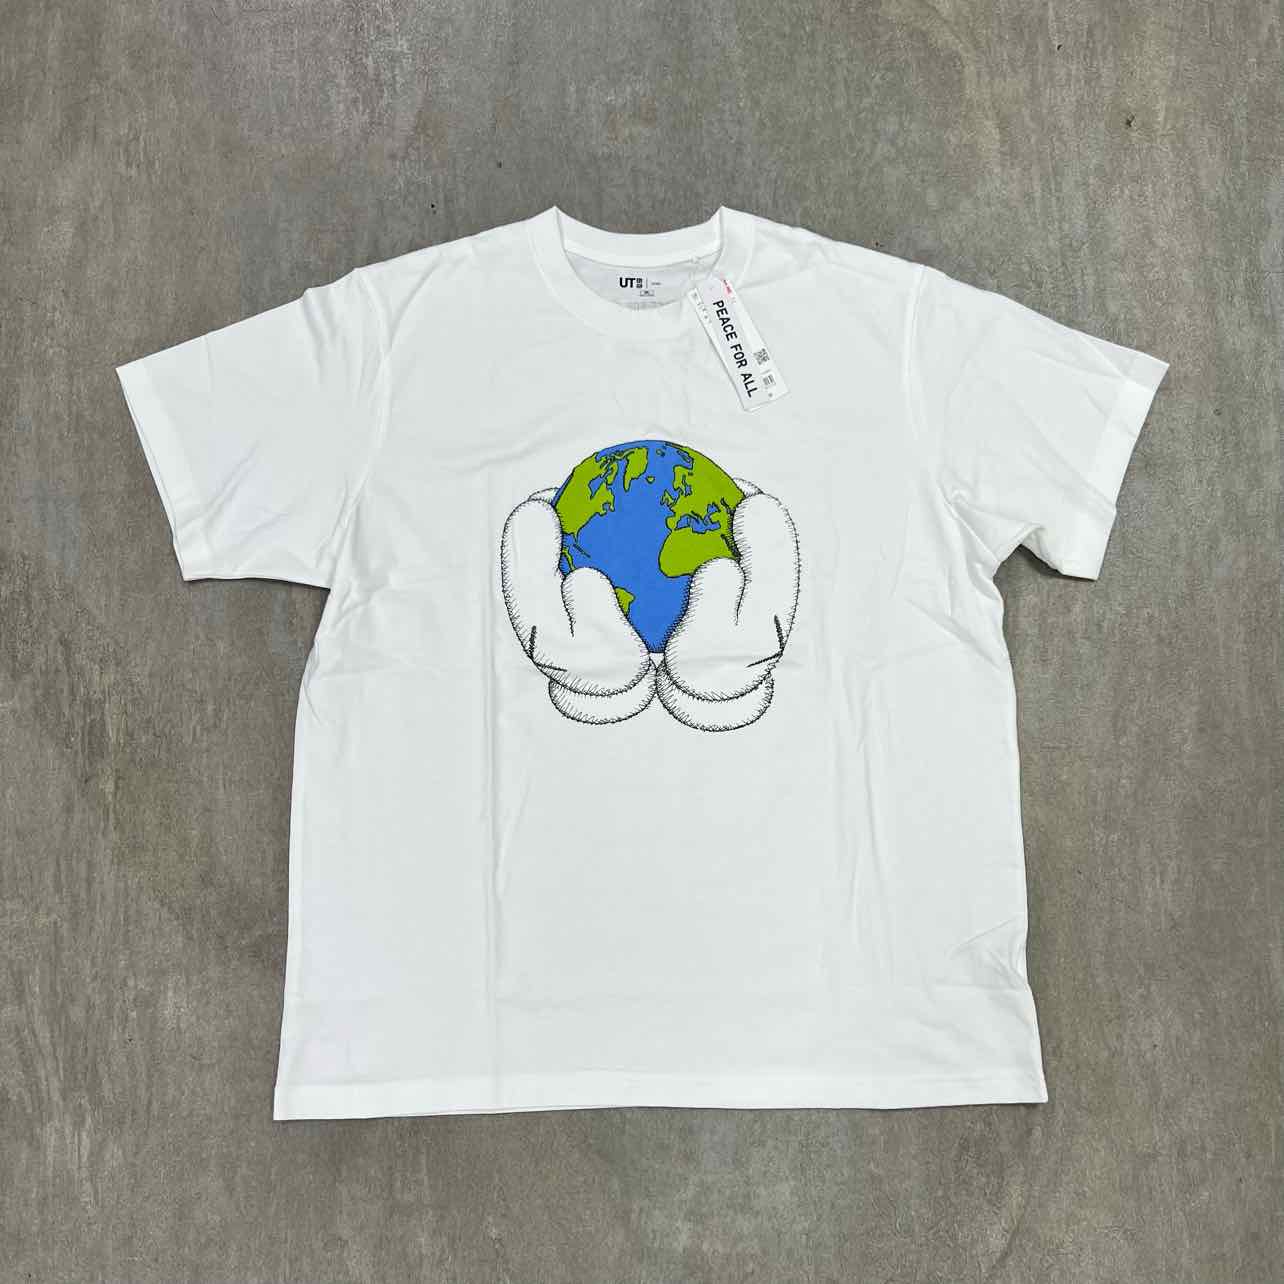 Uniqlo T-Shirt "KAWS PEACE FOR ALL" White New Size L